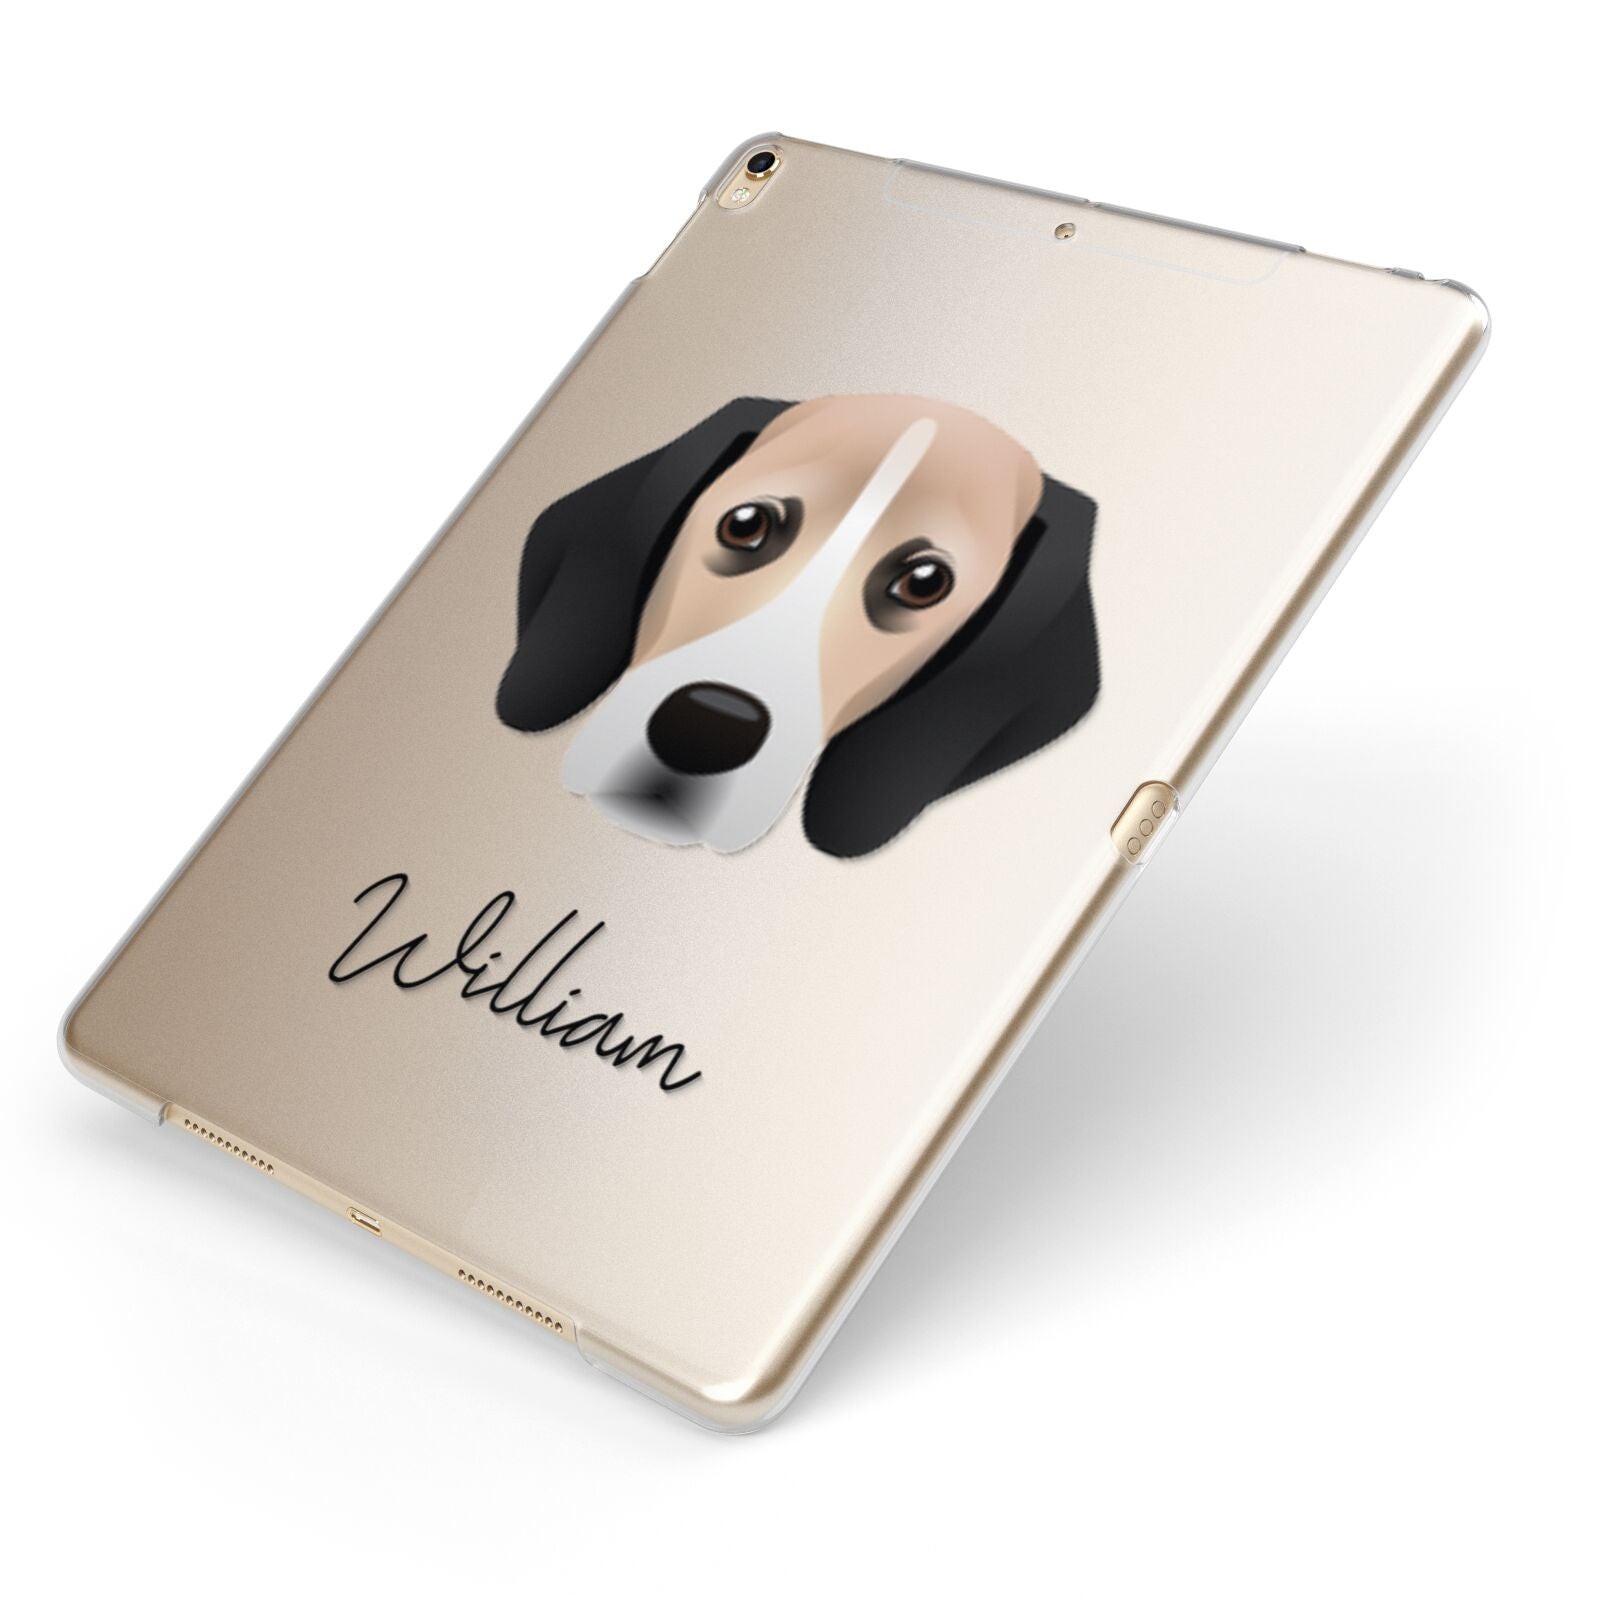 Bassugg Personalised Apple iPad Case on Gold iPad Side View